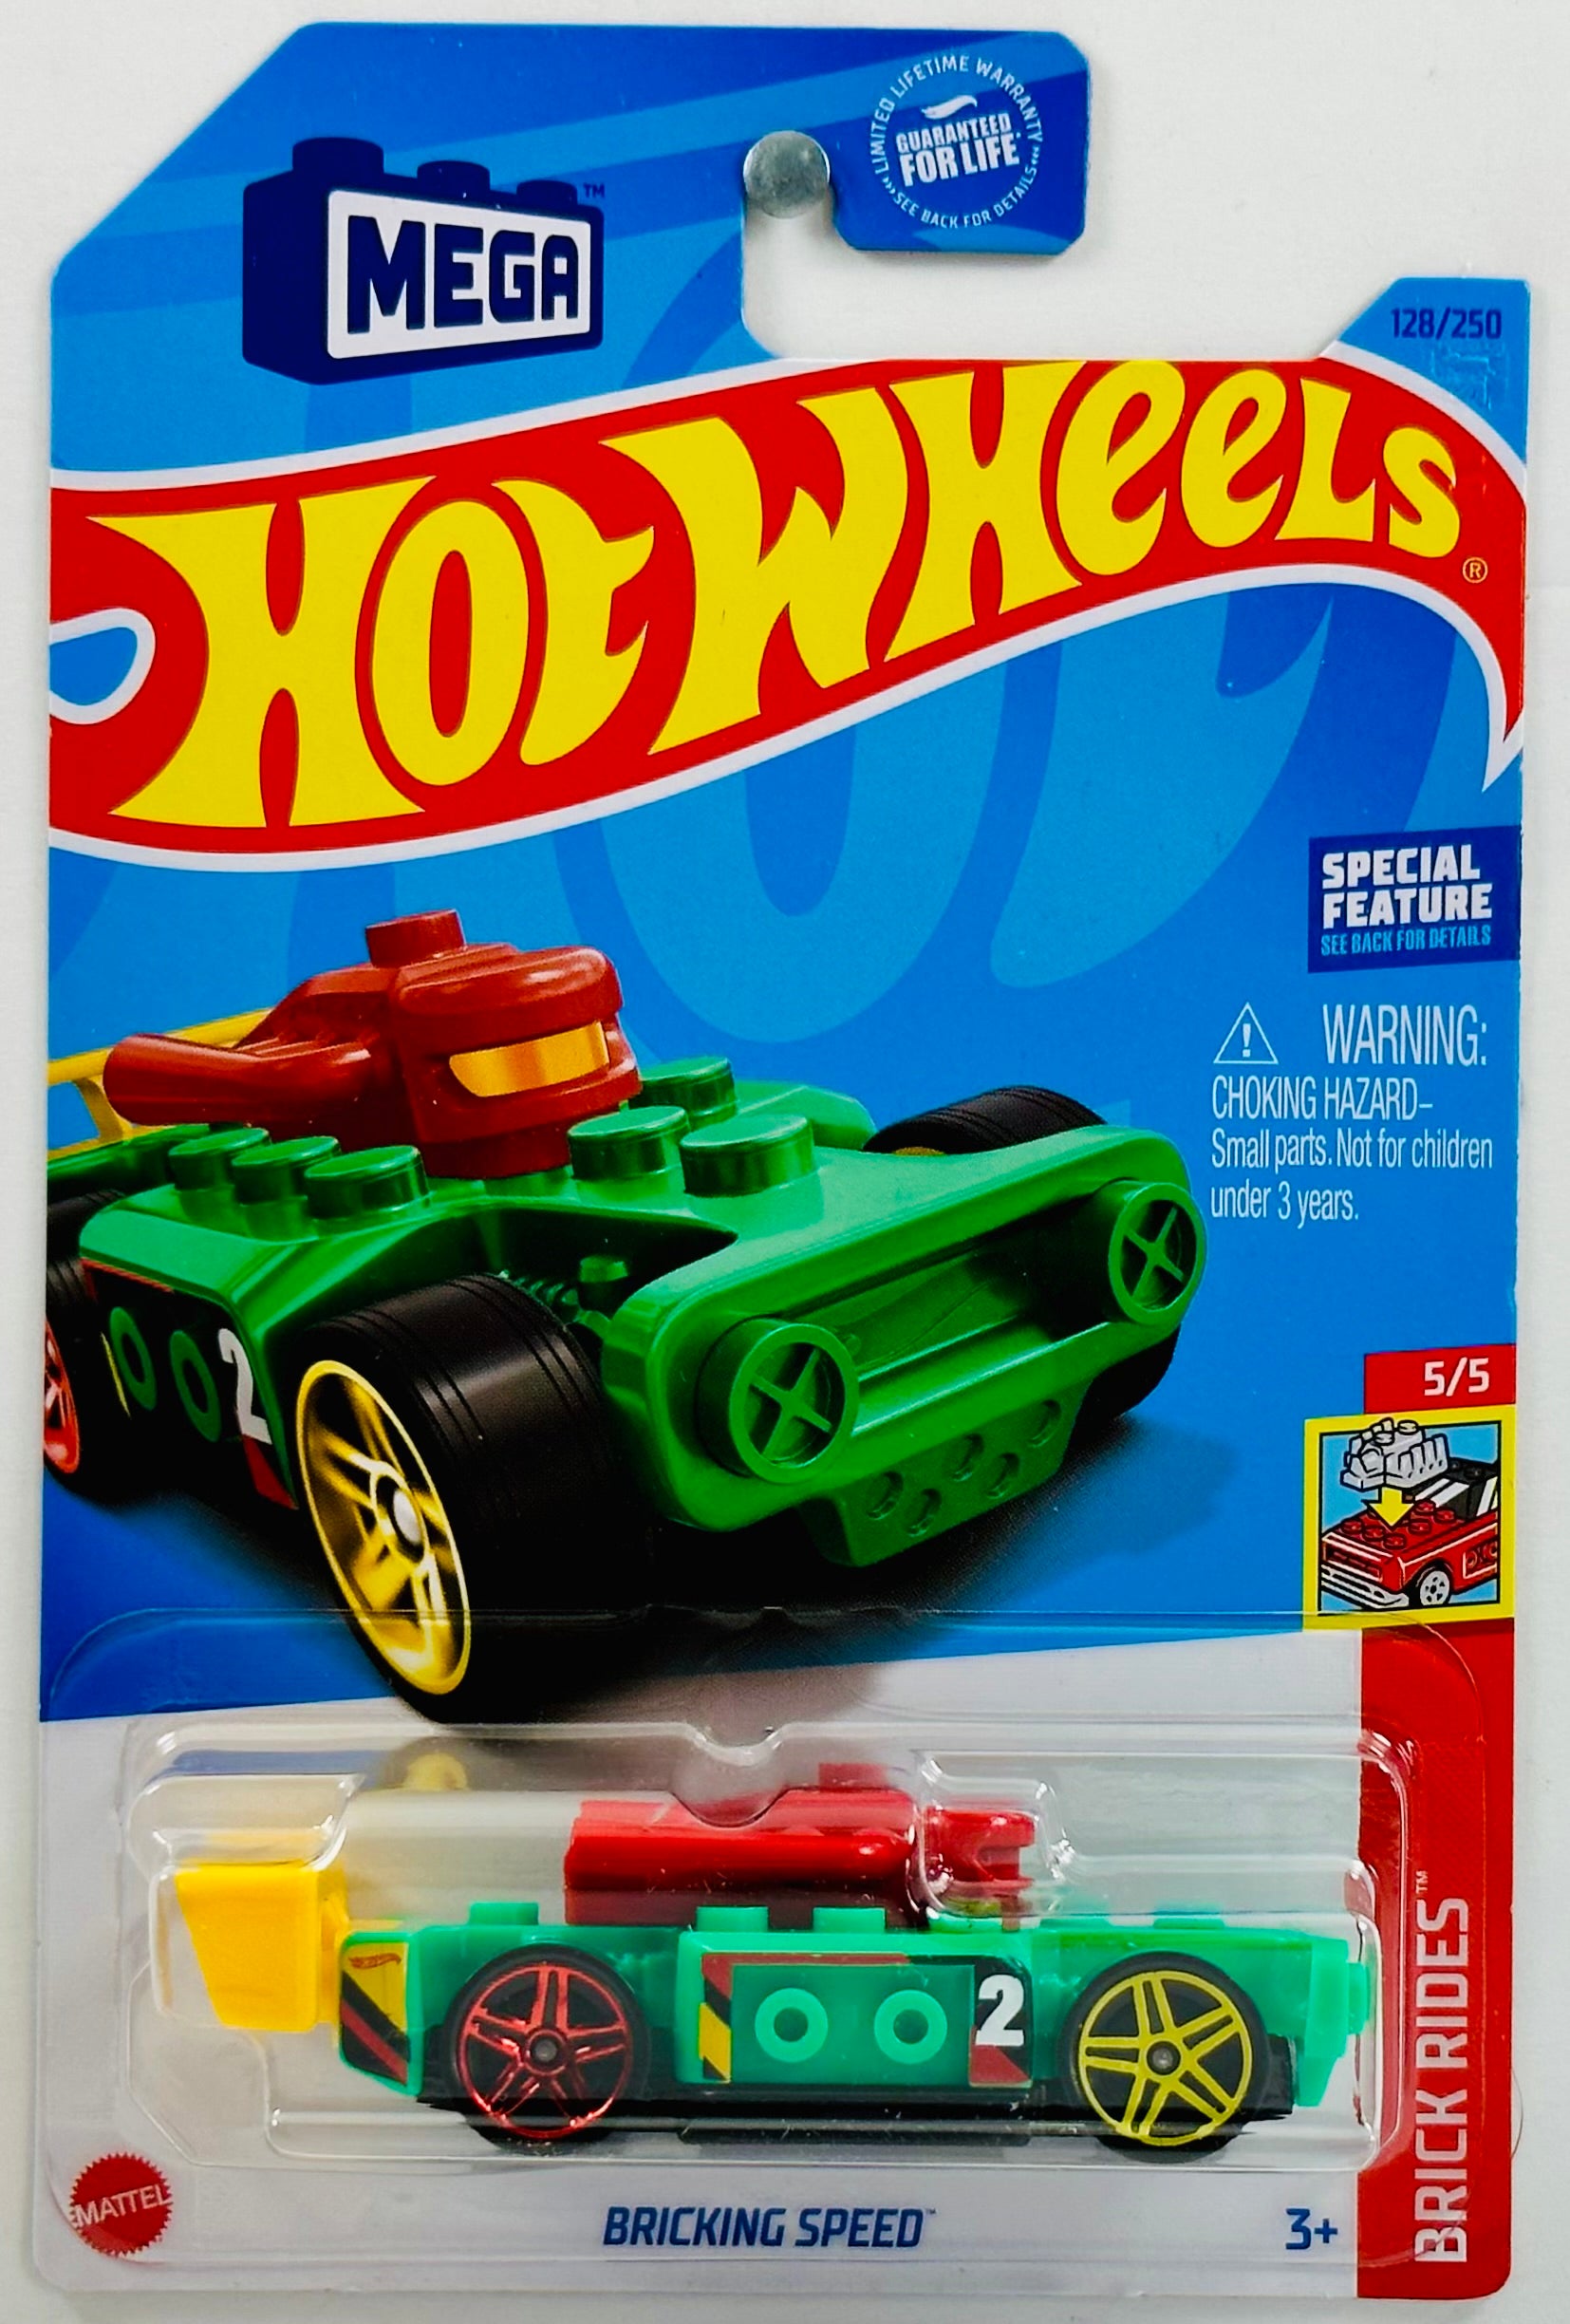 Hot Wheels 2023 - Collector # 128/250 - Brick Rides 05/05 - Bricking Speed  - Green - Red, Black & Yellow Accents / '2' - USA